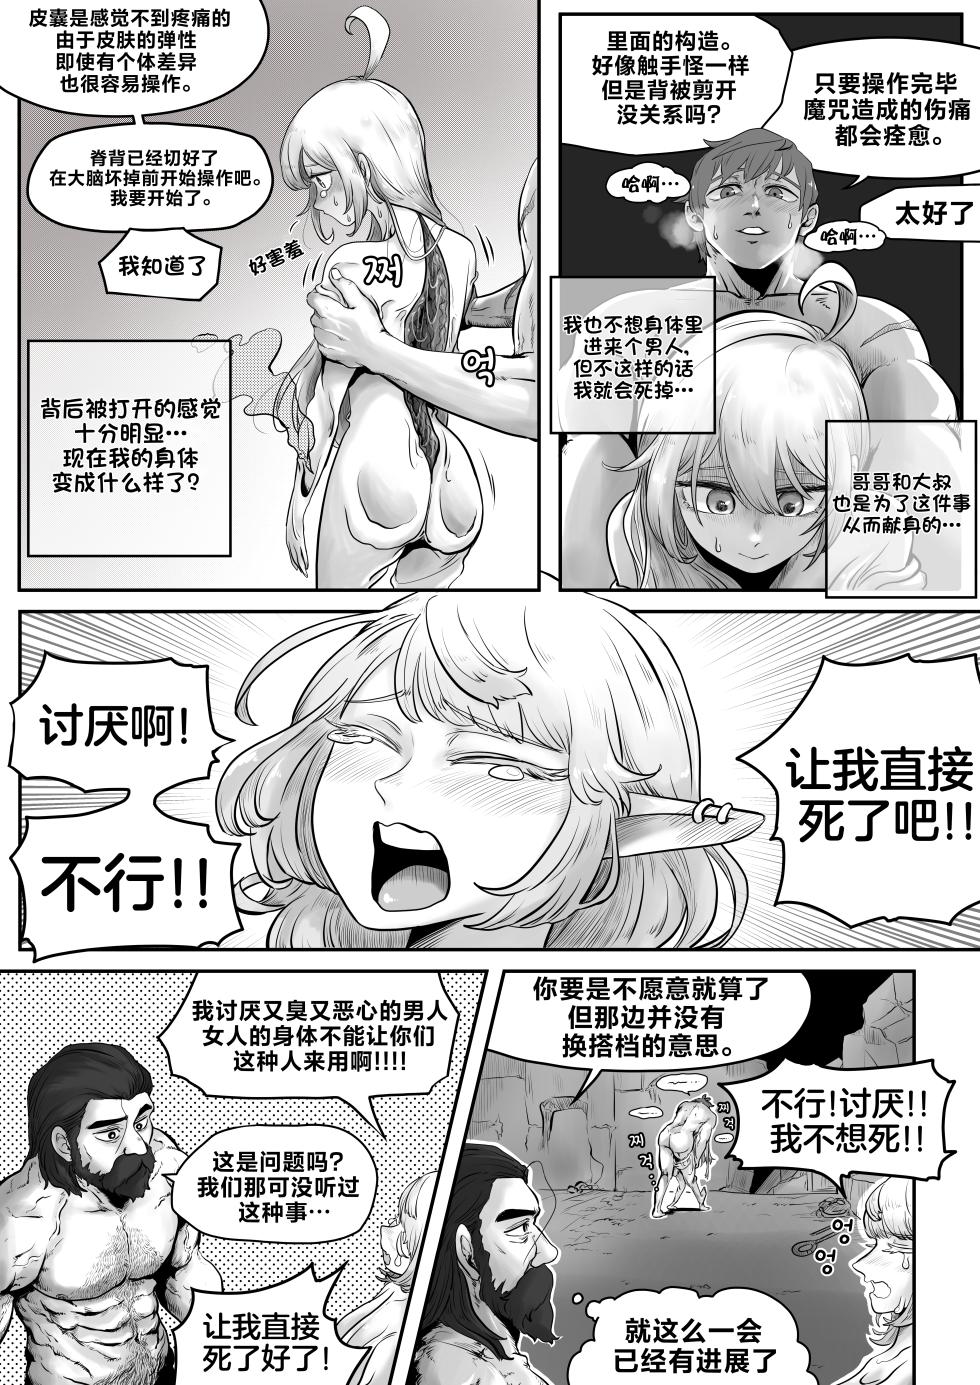 [Duckgu] Your Body Is Good [Chinese] [不咕鸟汉化组] - Page 6